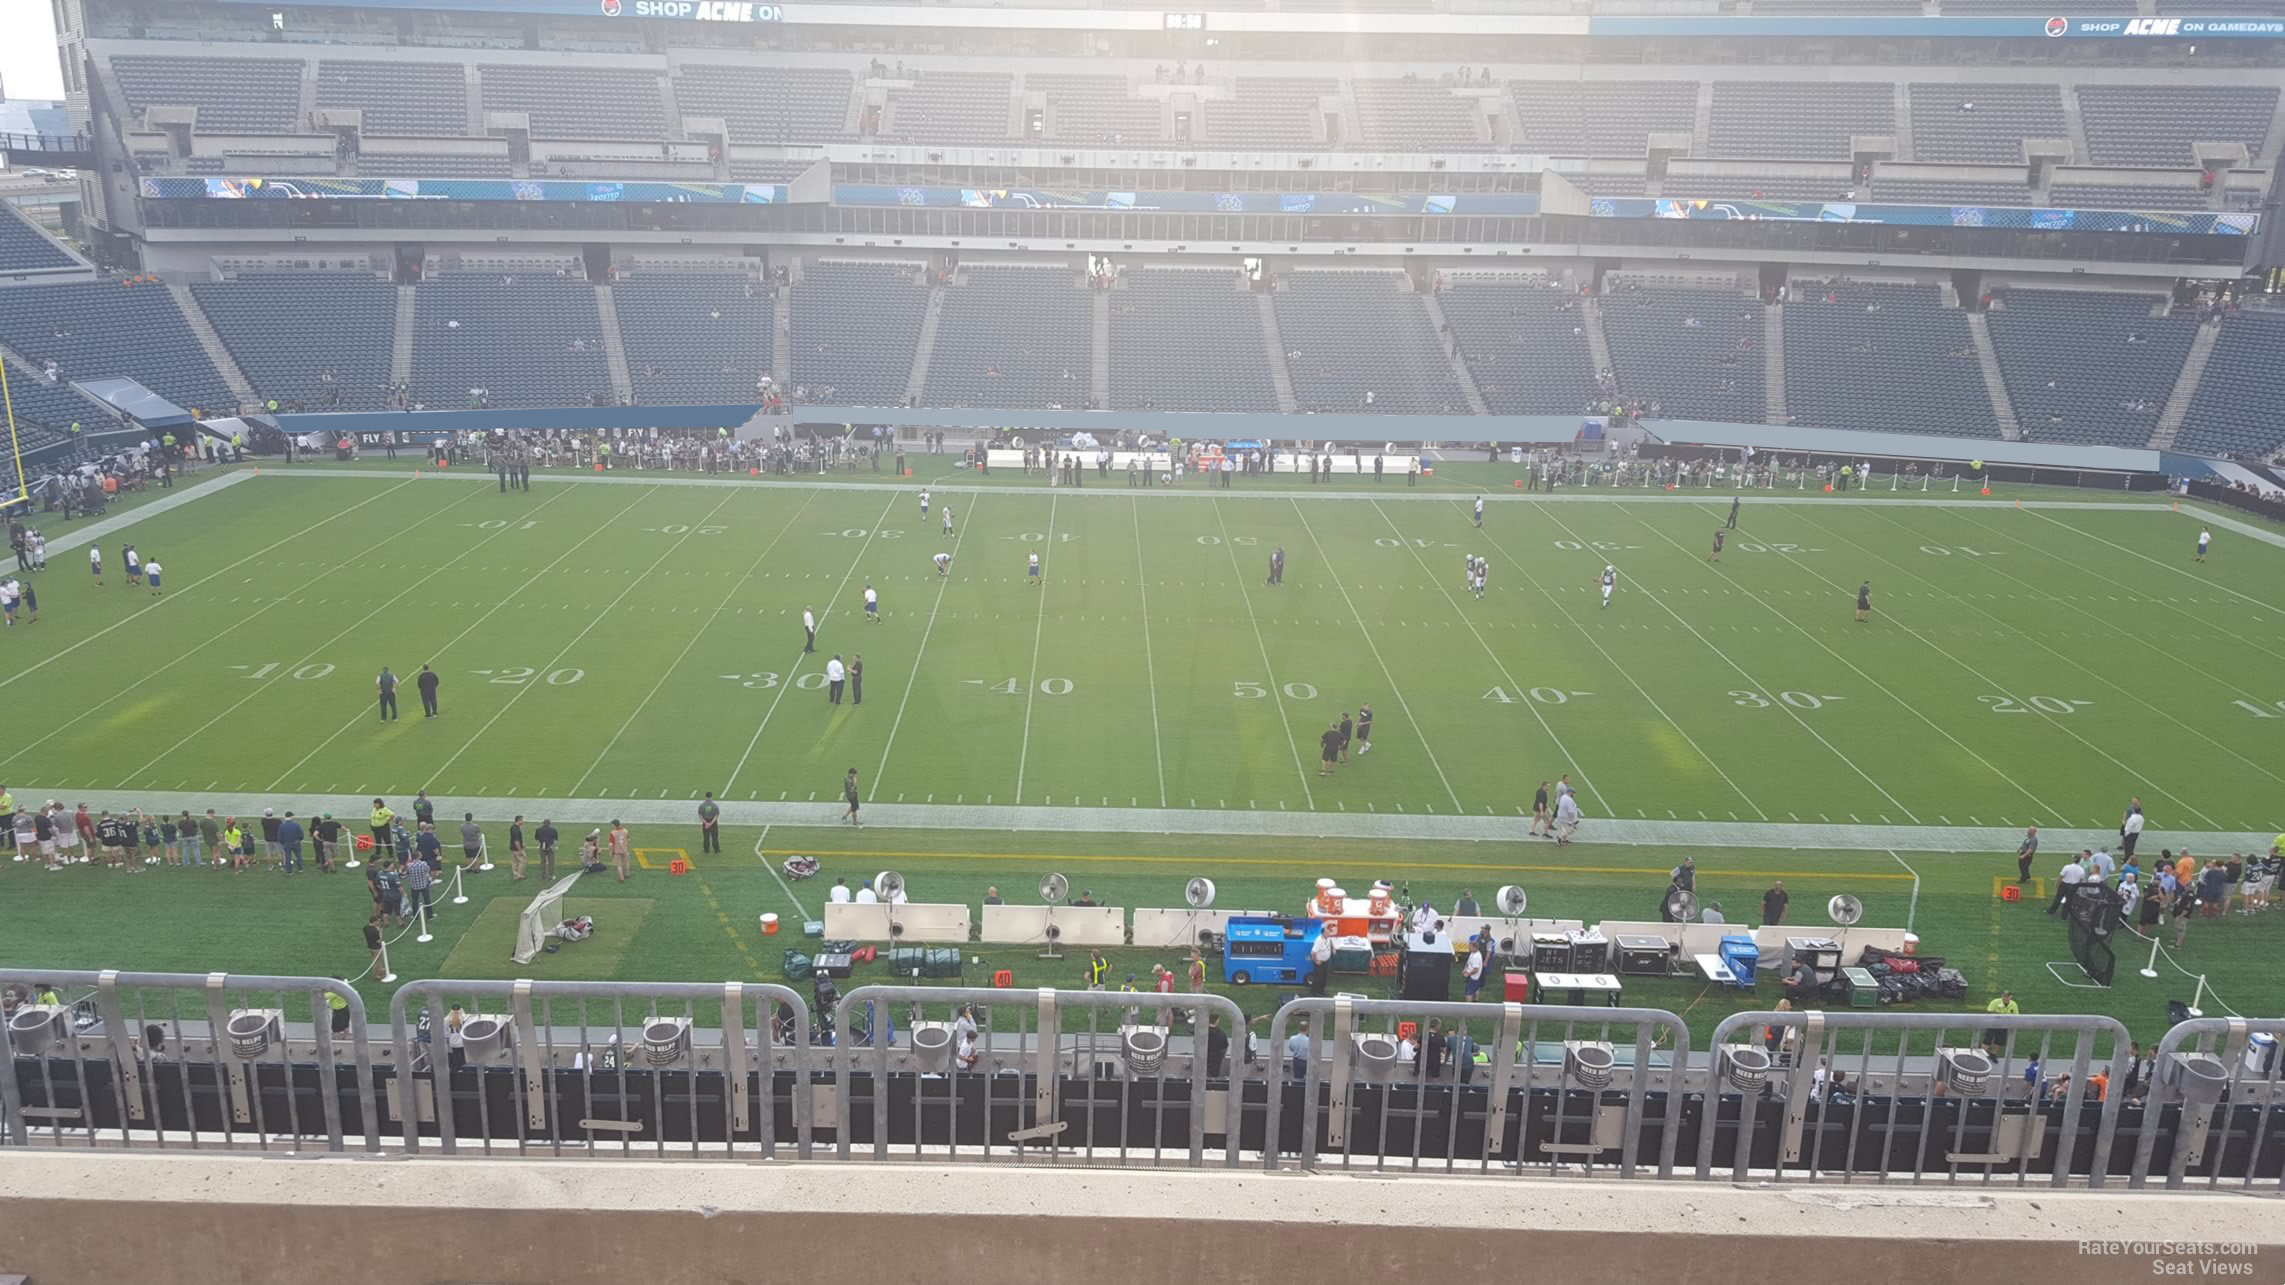 section c21, row 7 seat view  for football - lincoln financial field